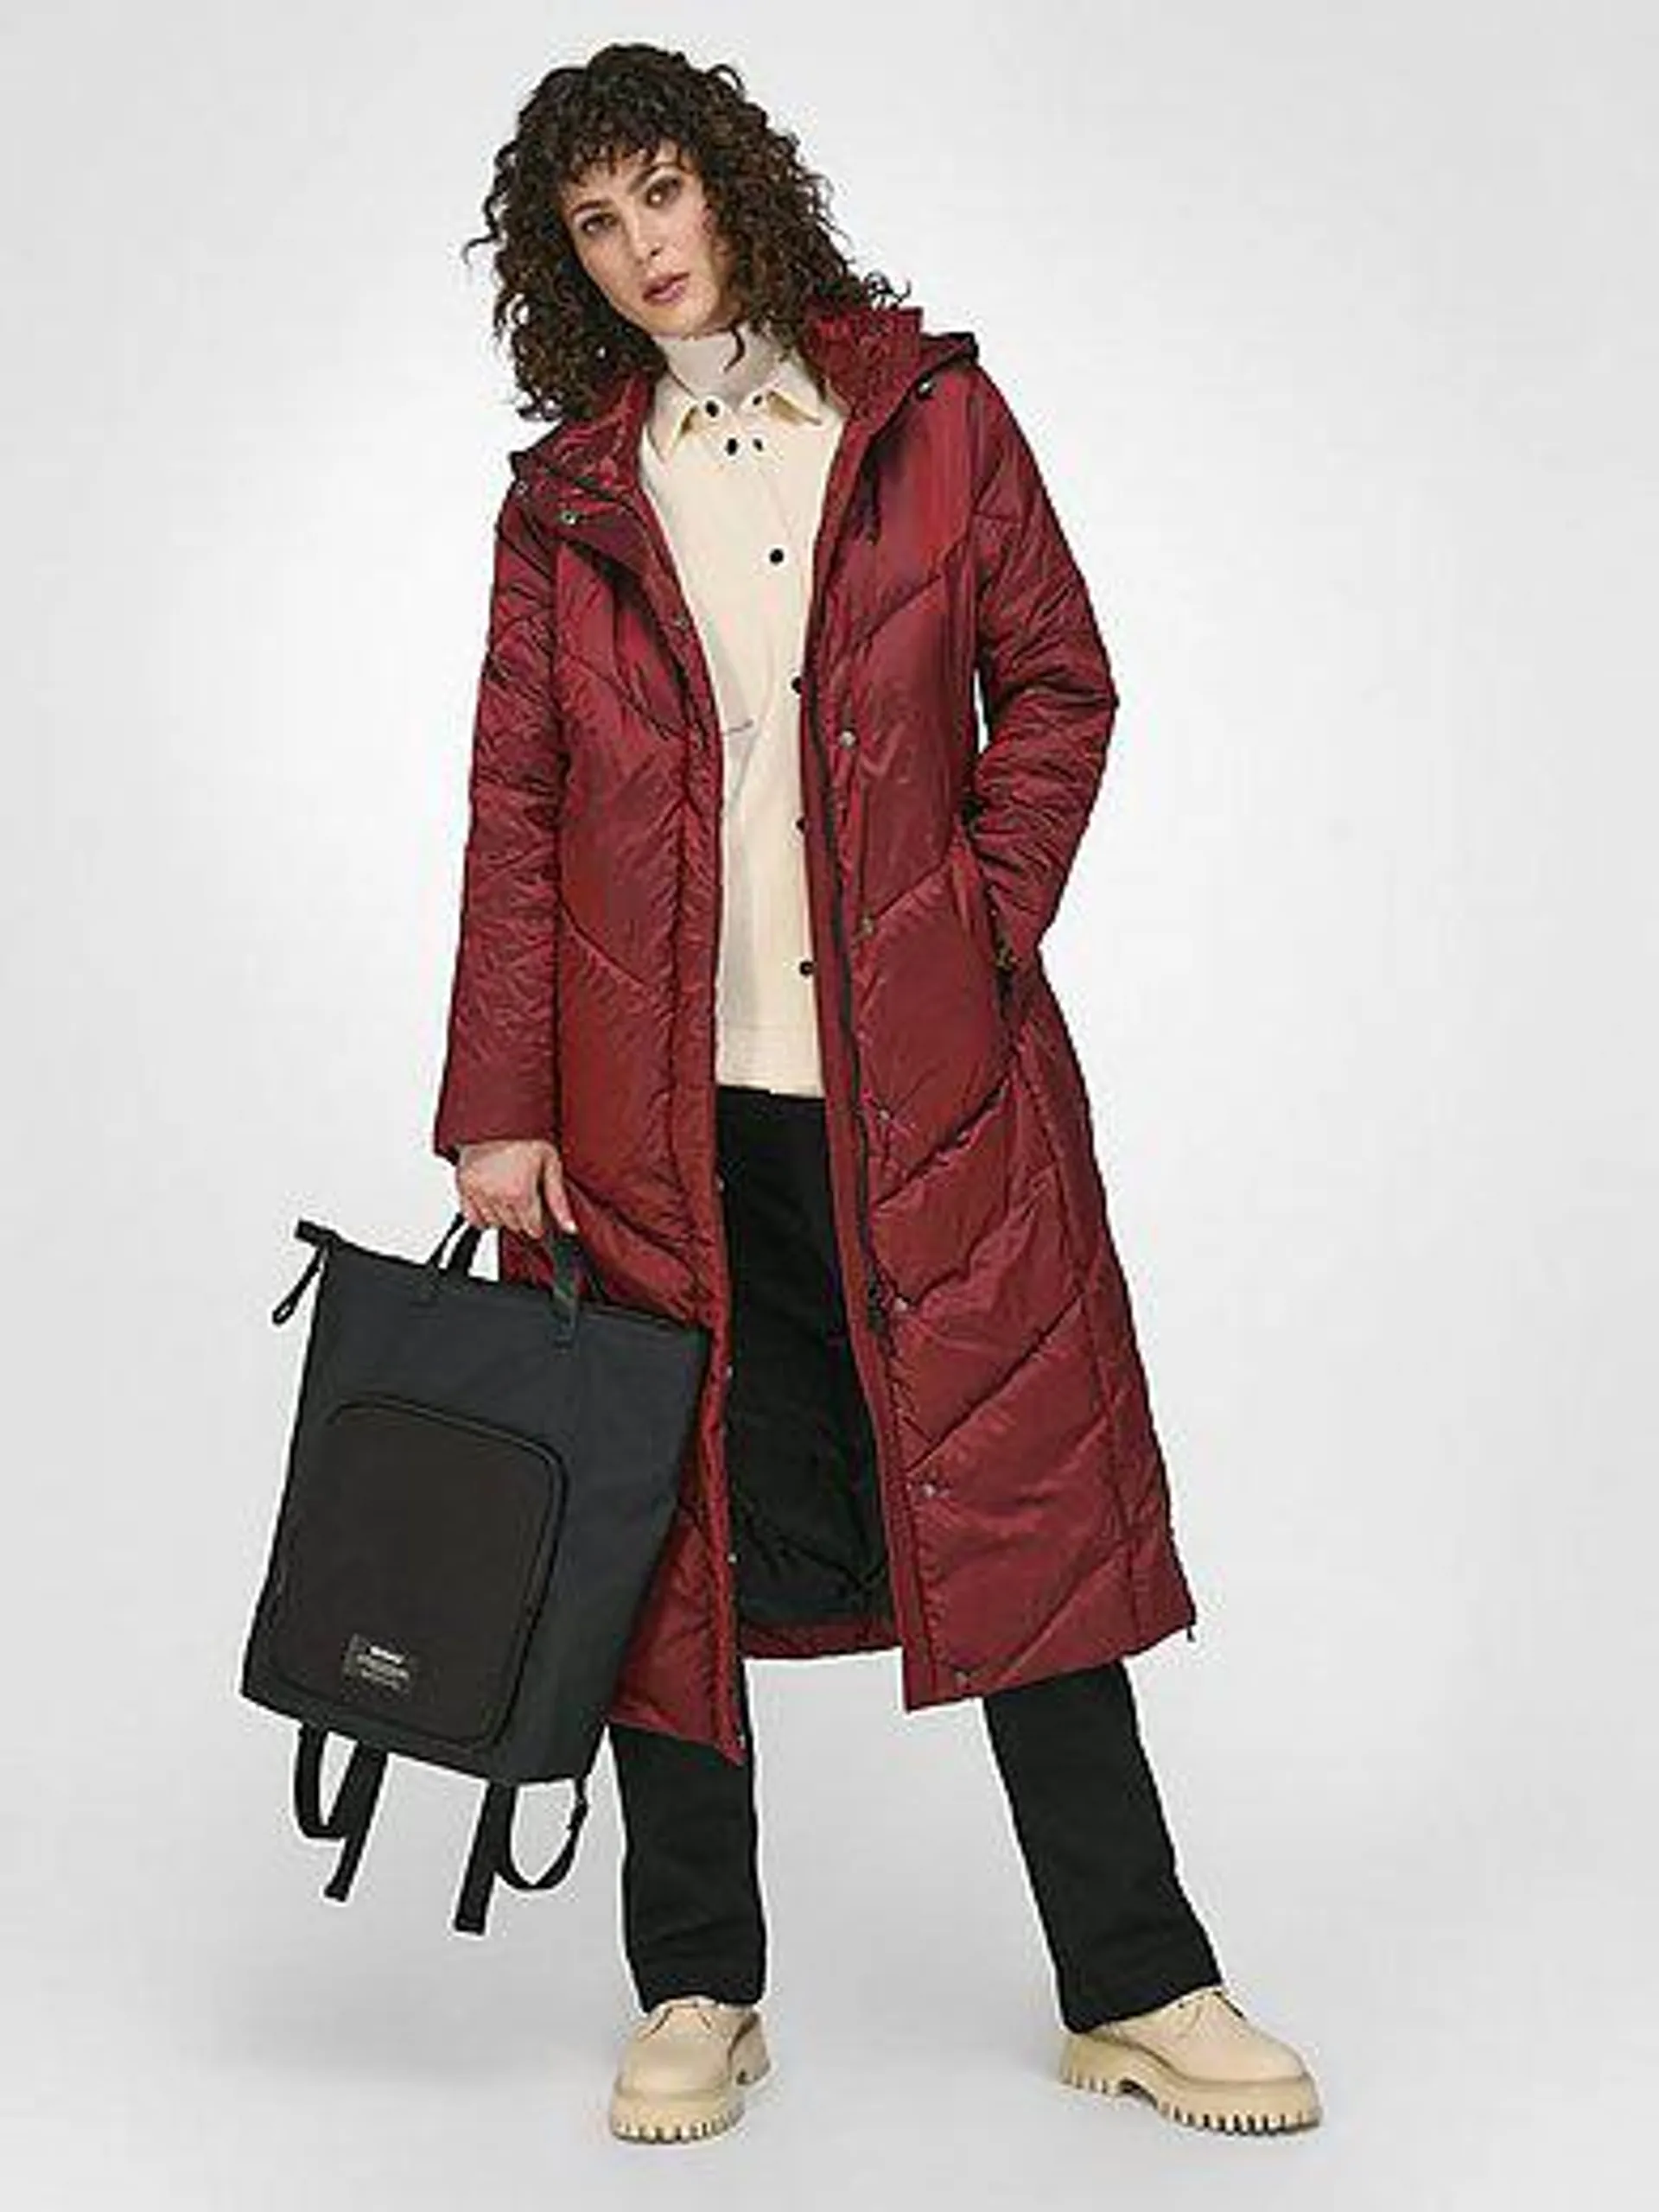 Quilted coat with hood